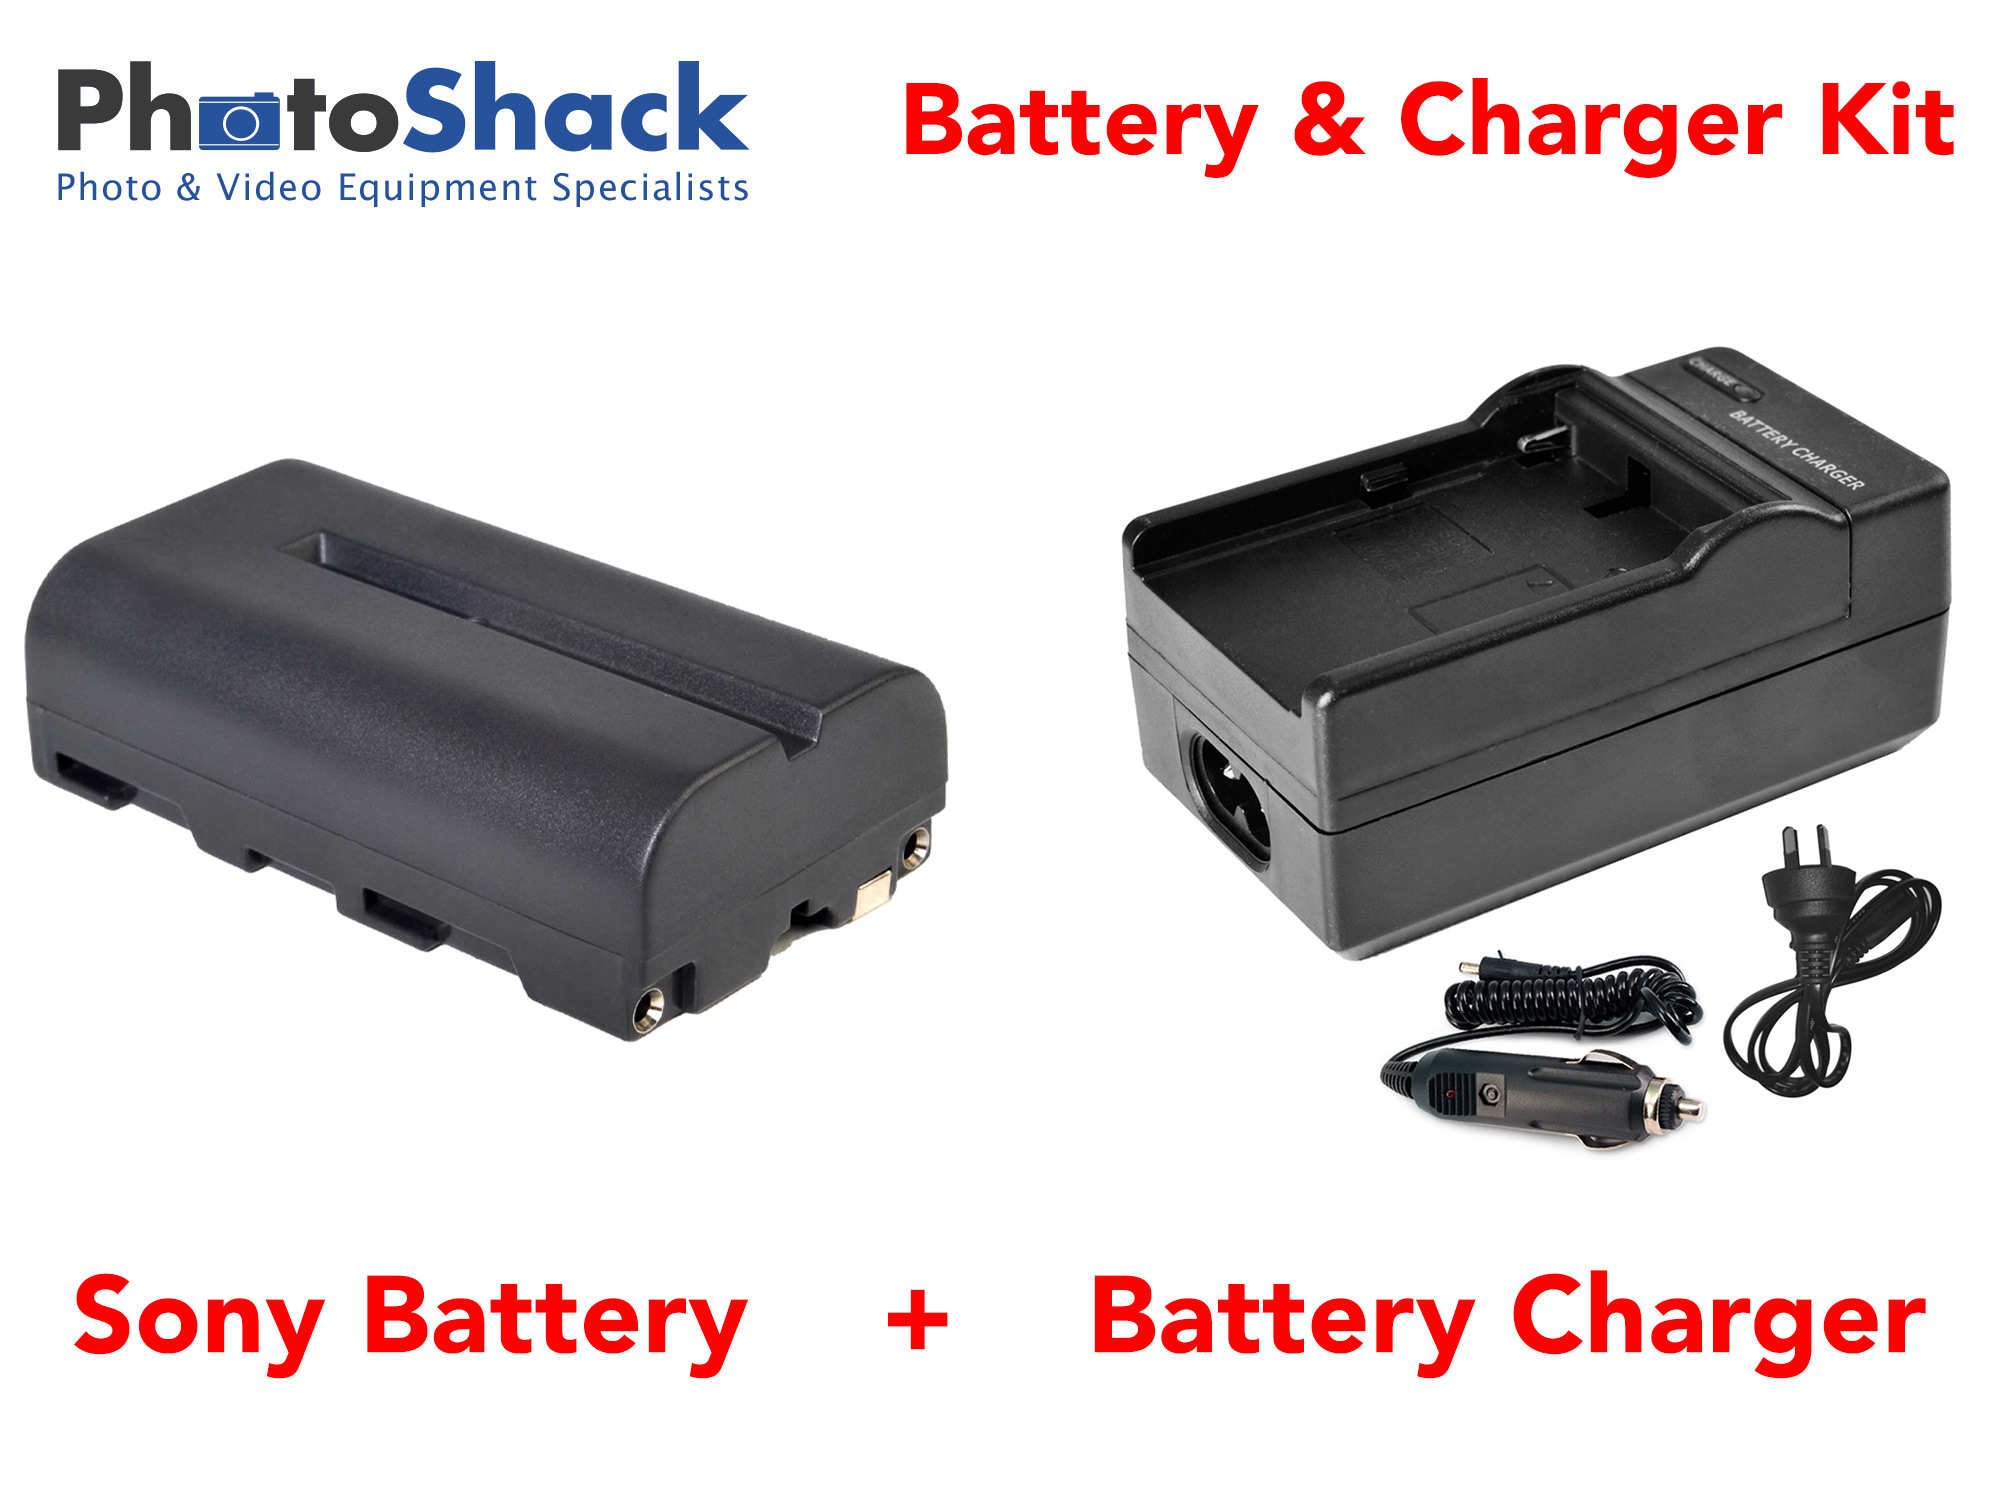 Charger & Battery Kit for Sony Cameras